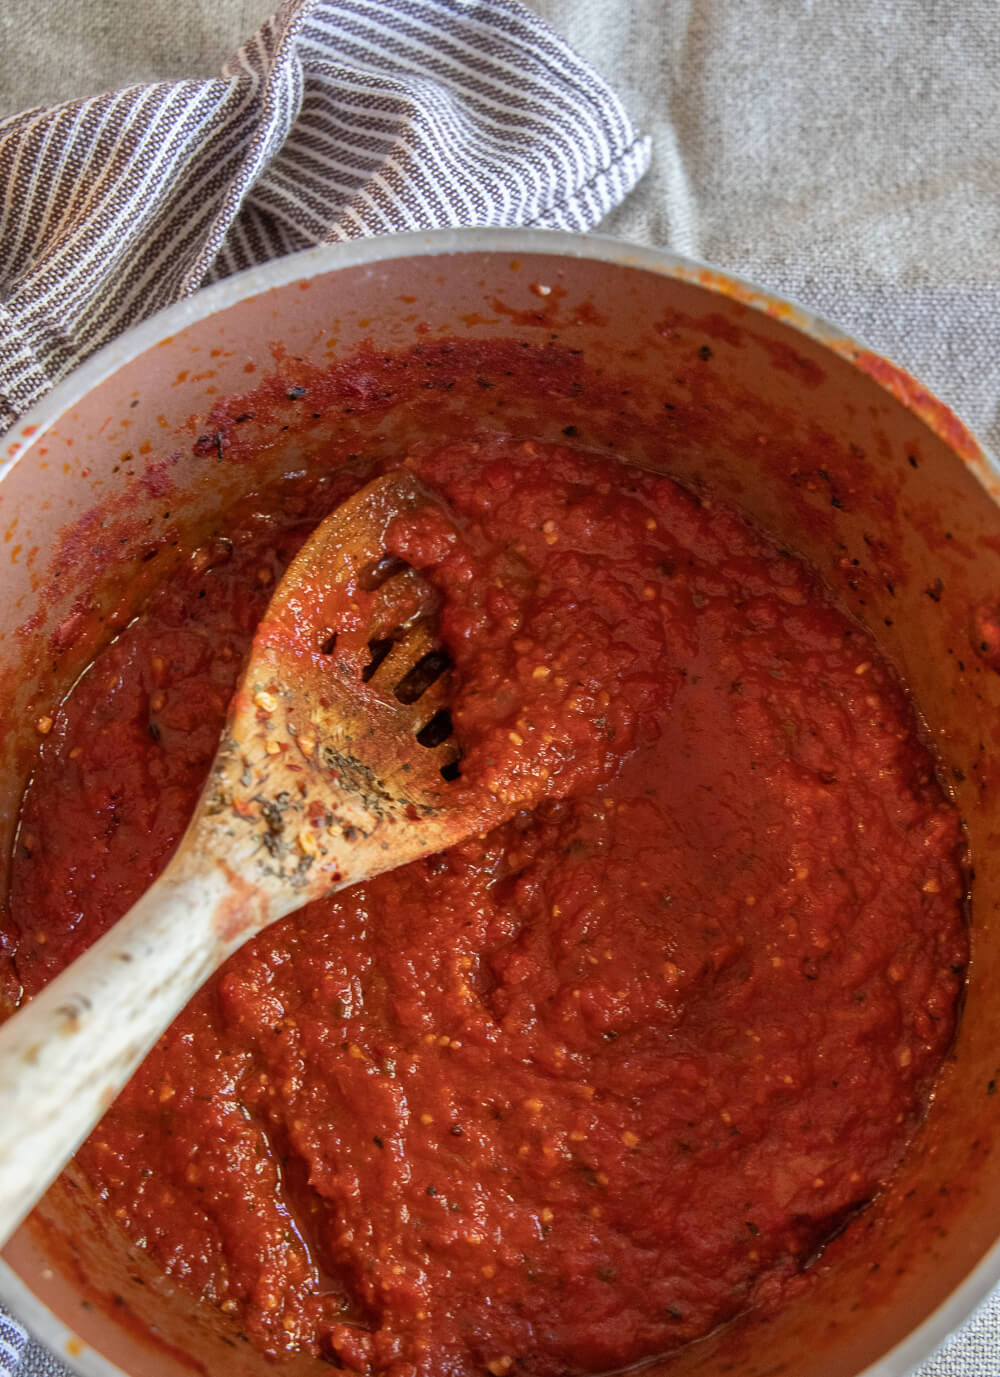 How to make foolproof easy homemade pizza sauce to use anytime you want to make homemade pizzas or need a great sauce for dipping.